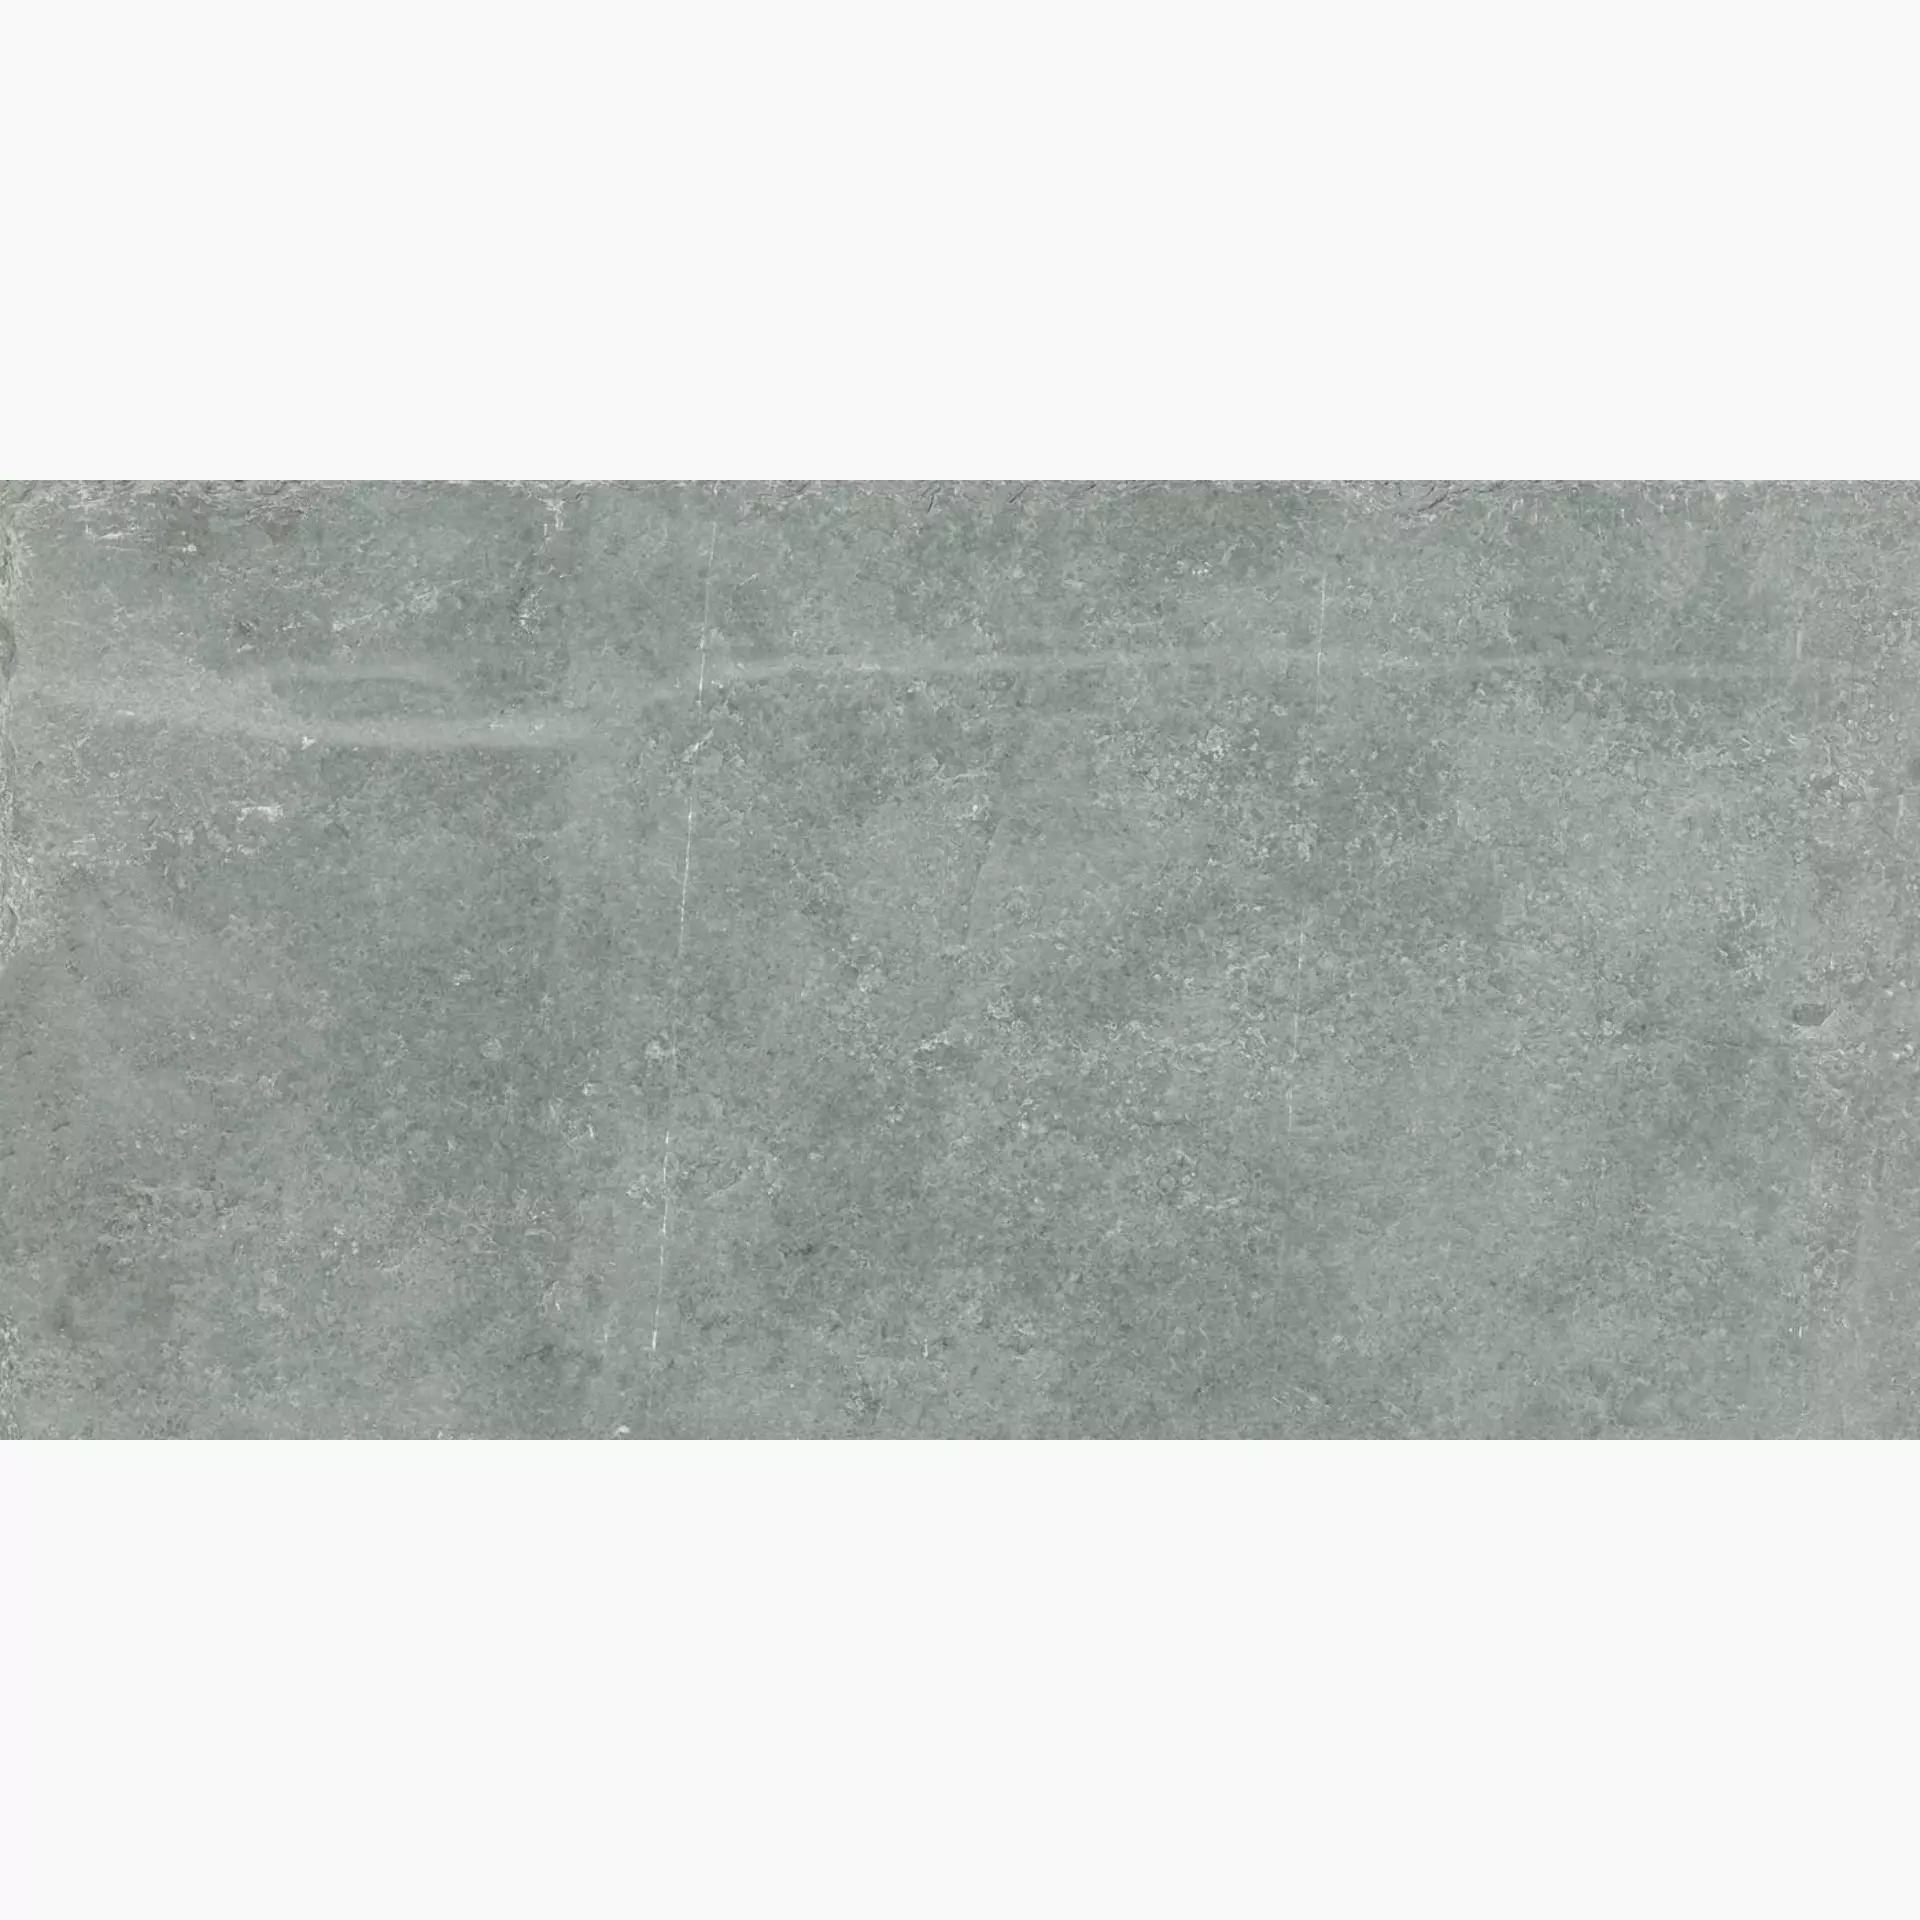 Provenza Groove Bright Grey Naturale E362 30x60cm rectified 9,5mm